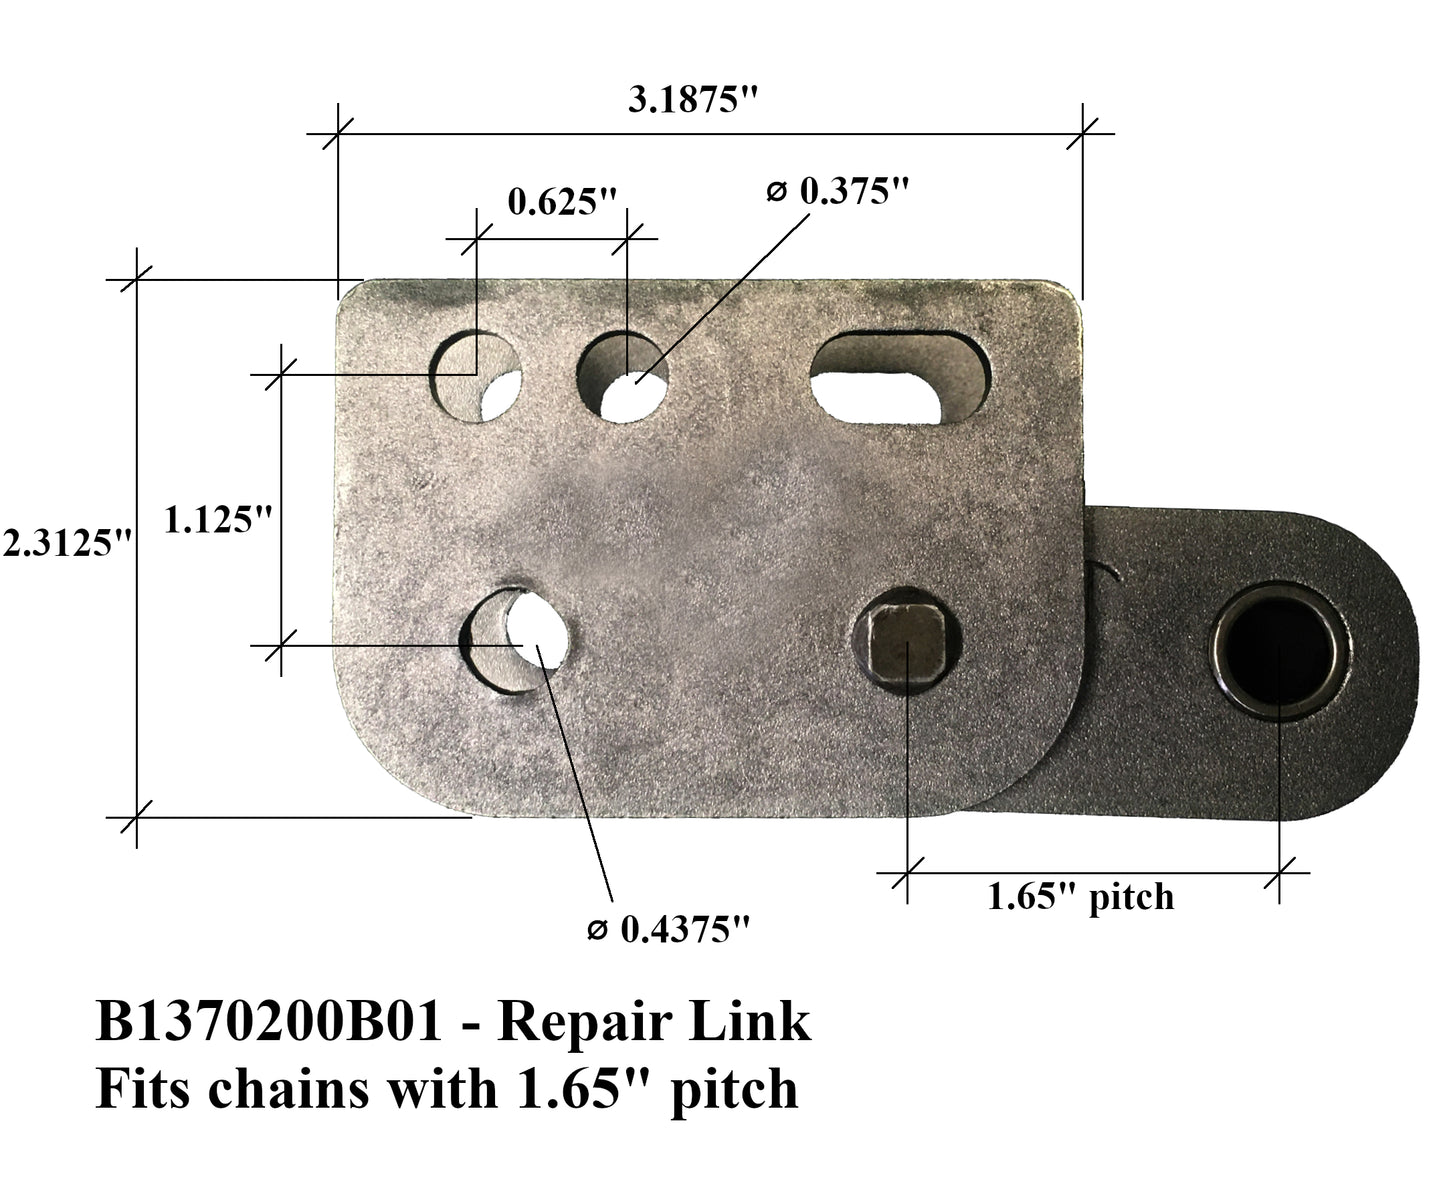 Trencher Repair Link w Pins, fits Many Small Chain trenchers w/ 1.654" Pitch